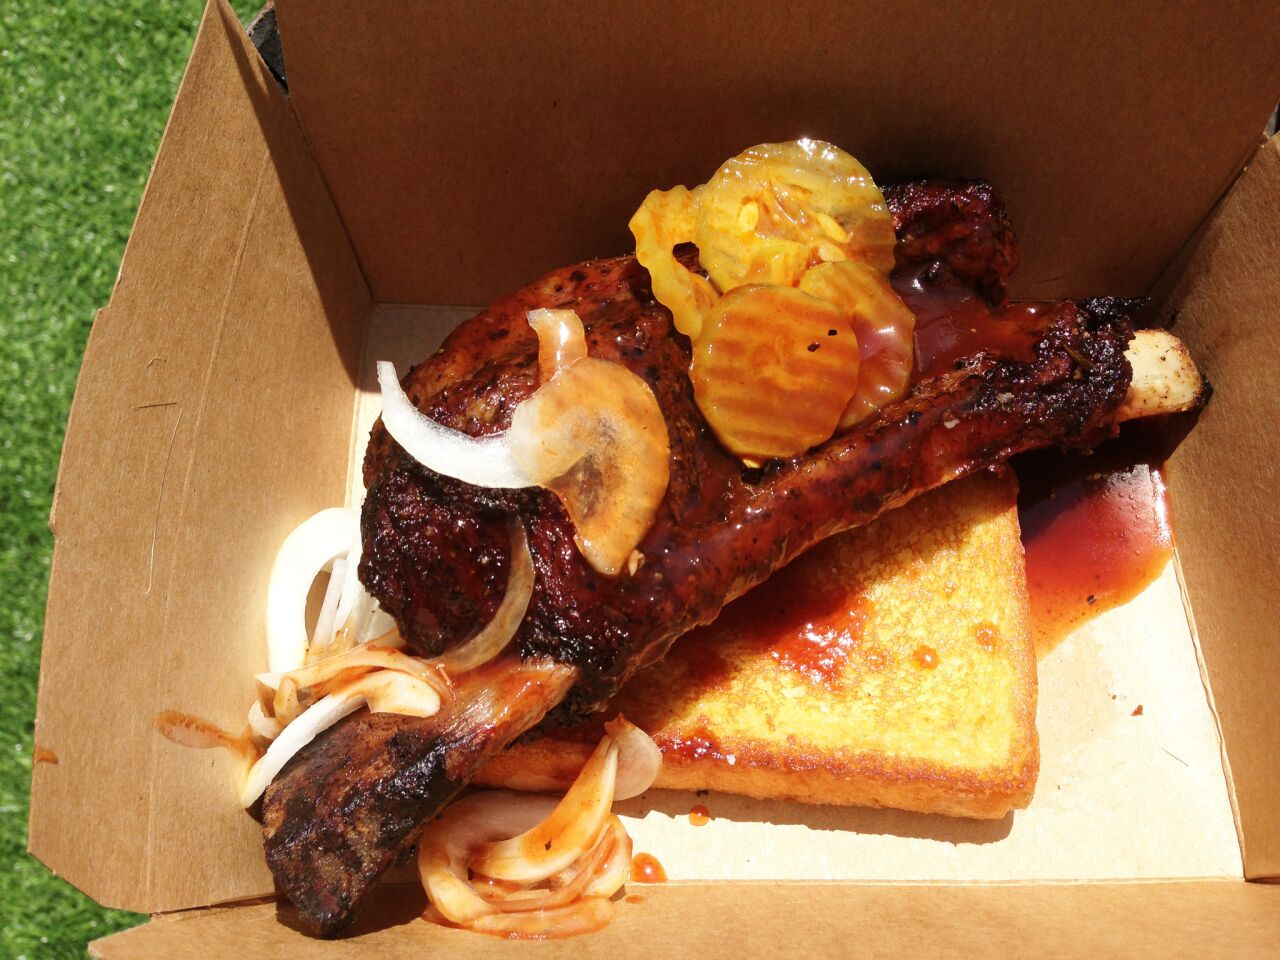 The beef rib with Texas toast, sweet onion and spicy pickles.